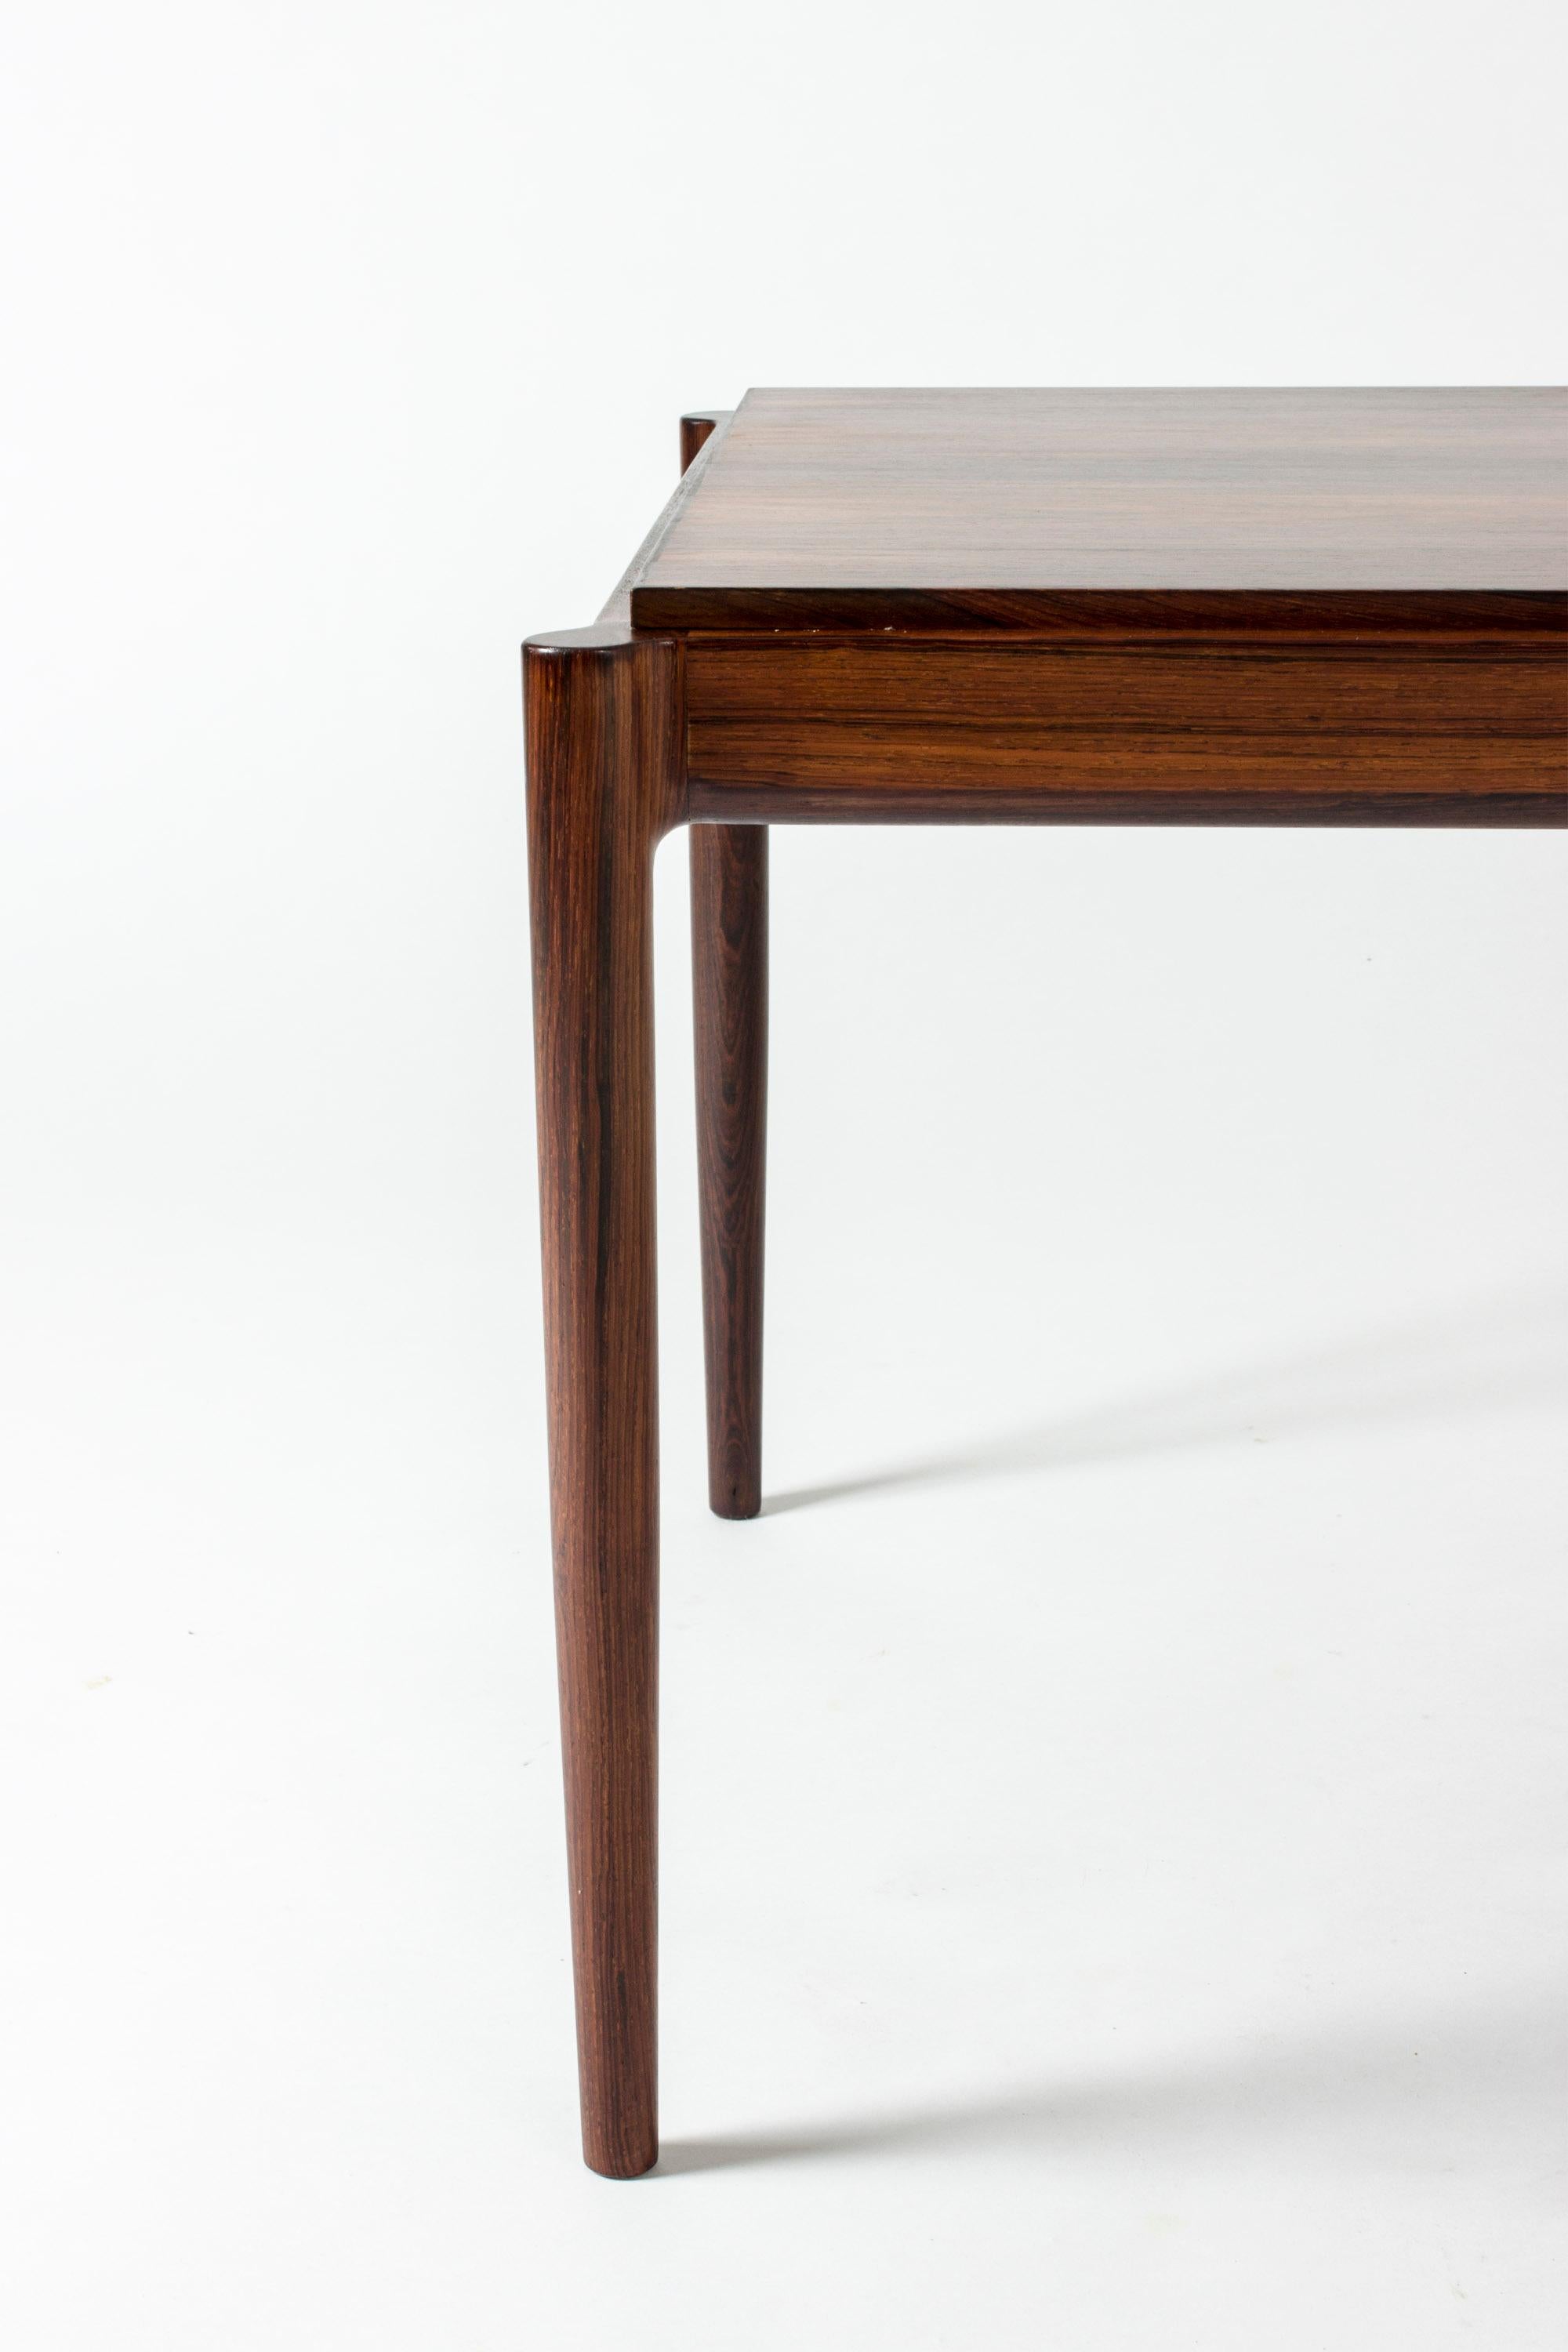 Mid-20th Century Rosewood Coffee Table by Ib Kofod-Larson for Seffle Möller, Sweden, 1960s For Sale